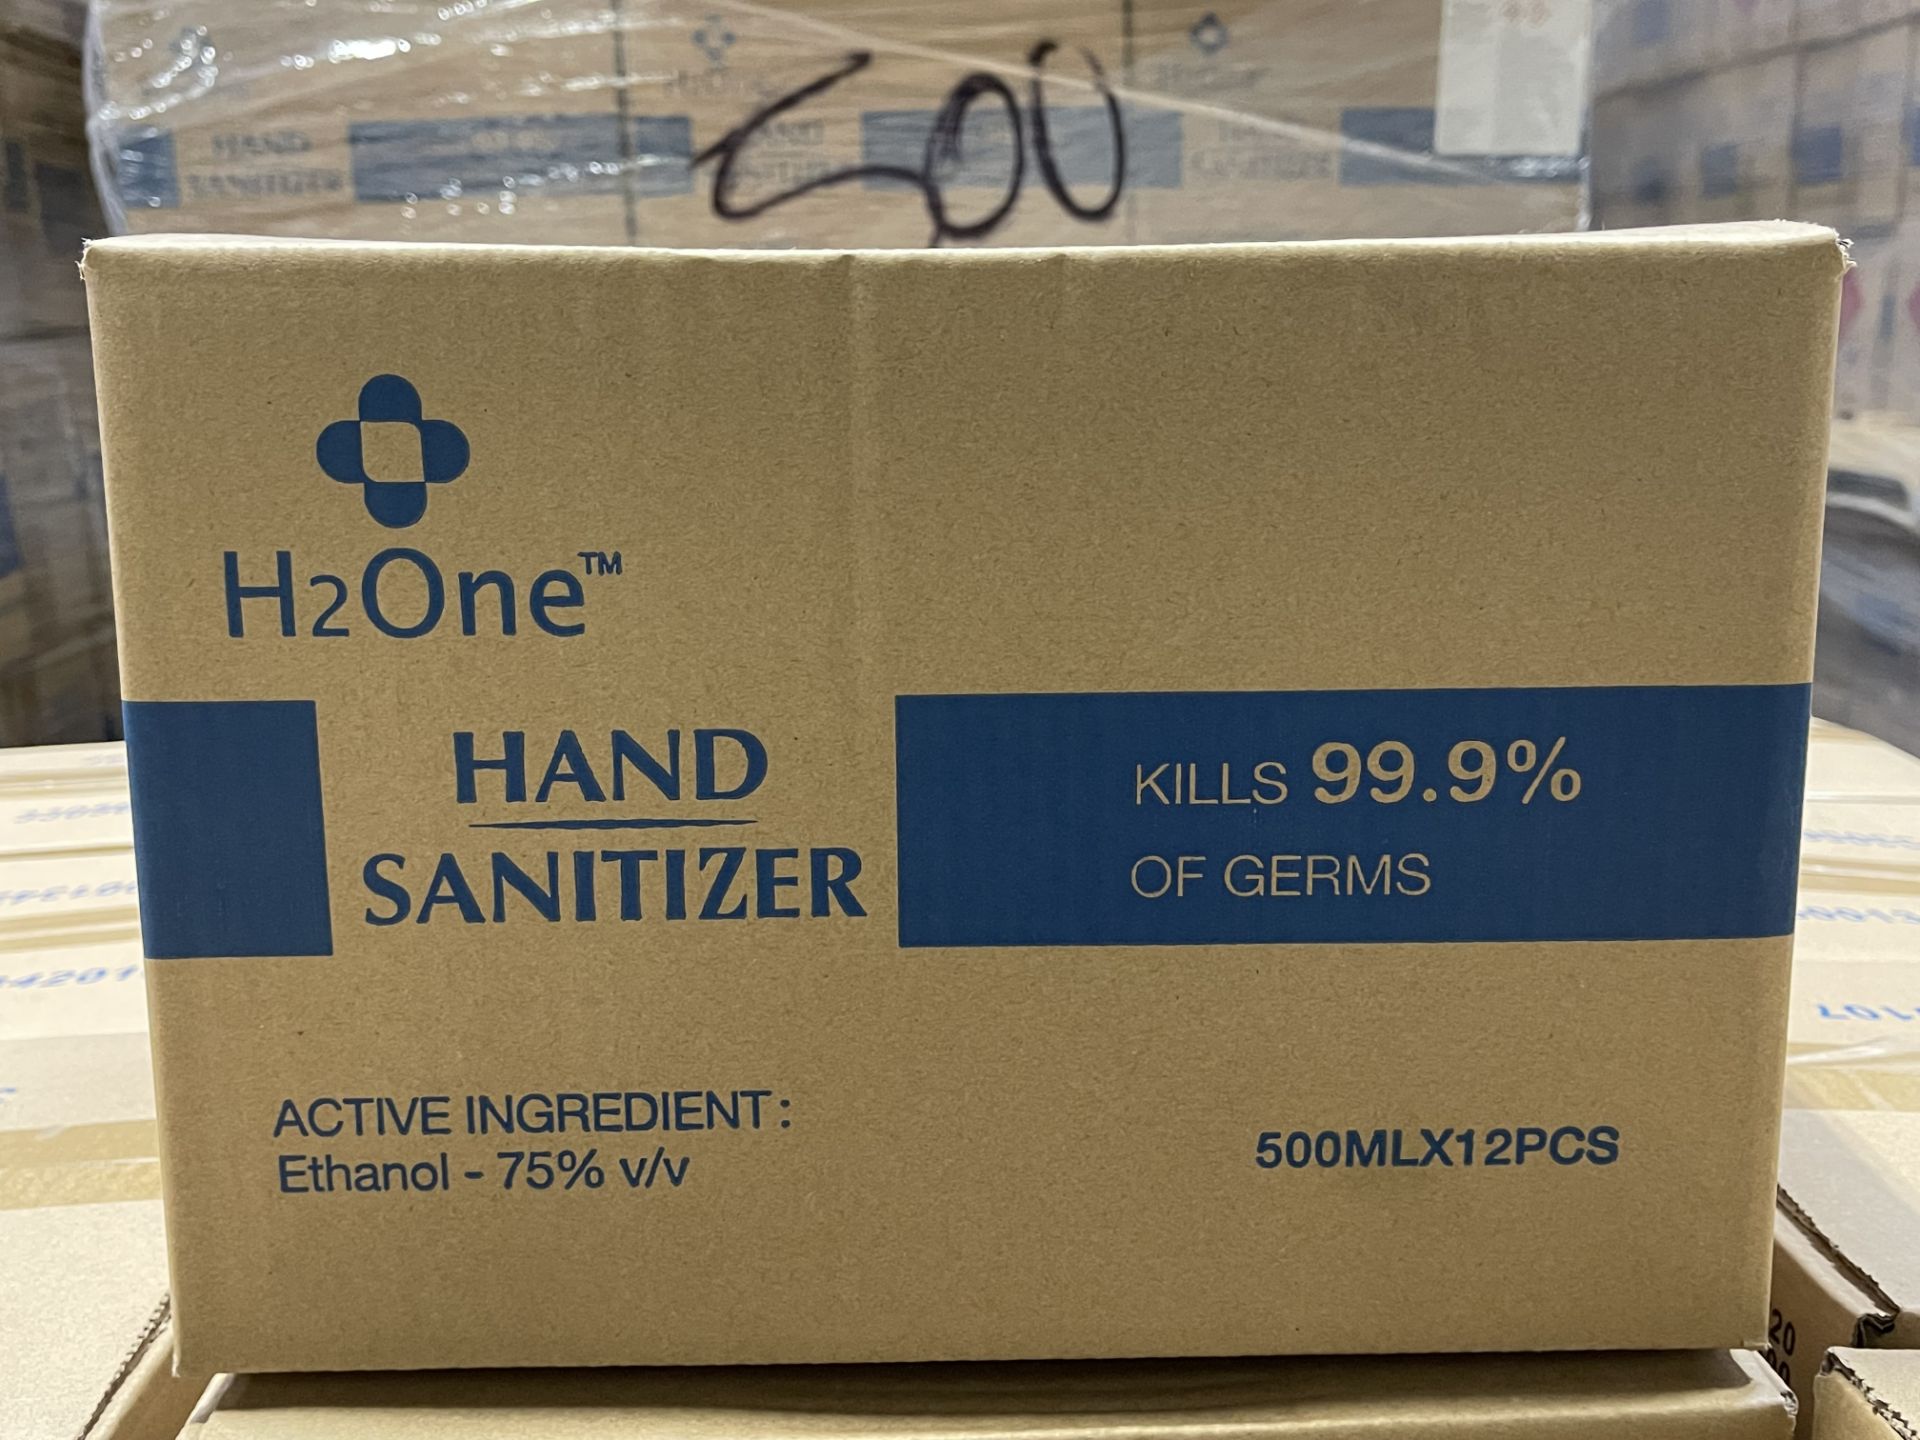 H2ONE HAND SANITIZER 500ML CASES - 1X - Image 4 of 5